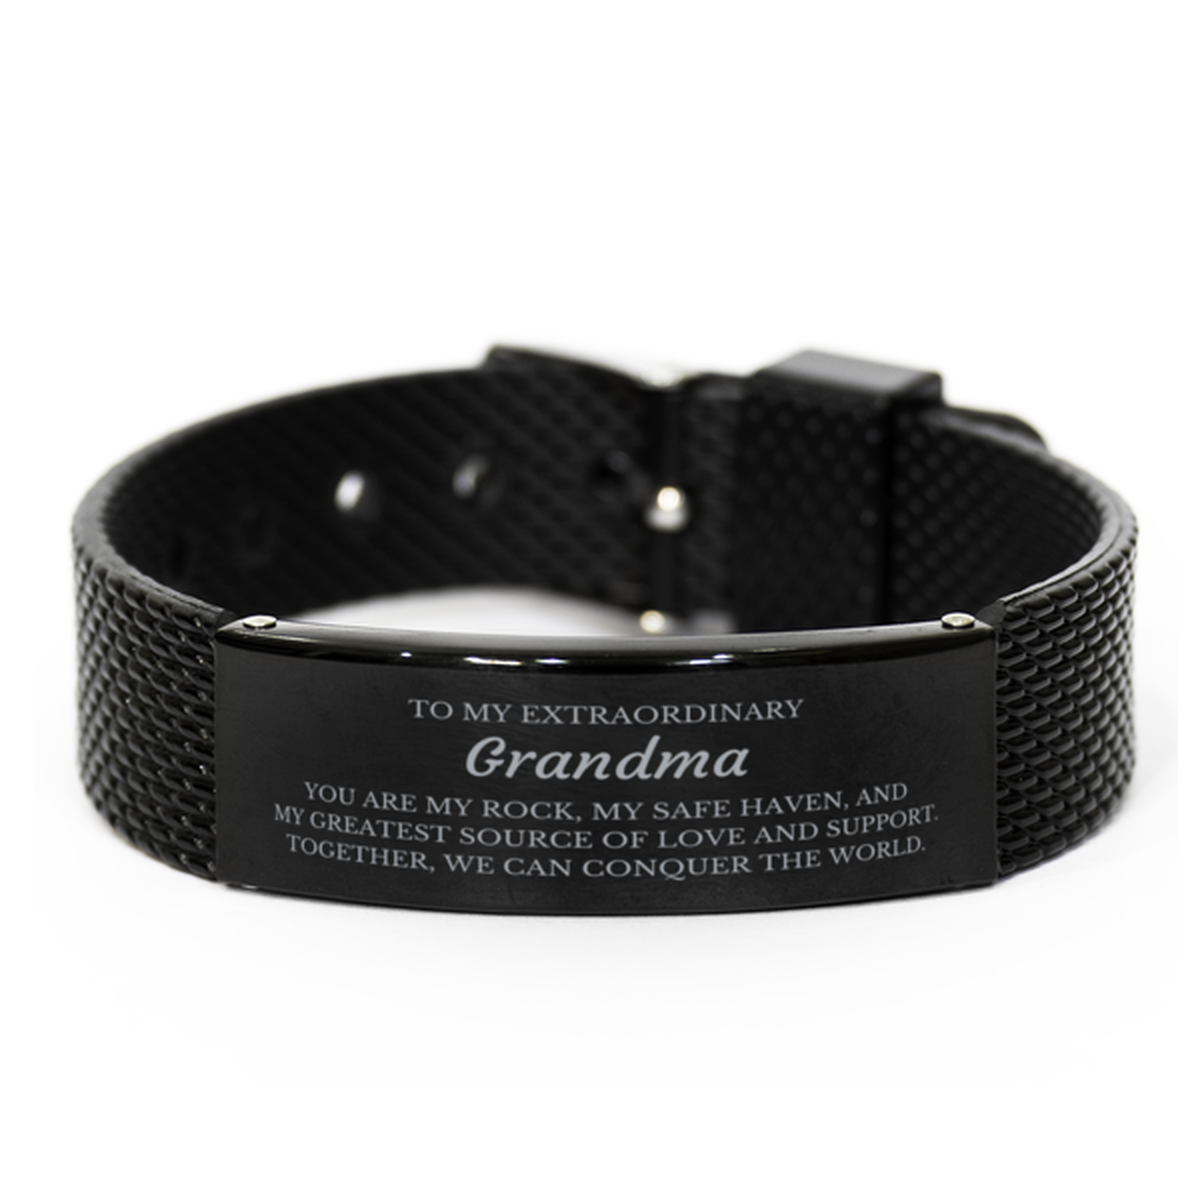 To My Extraordinary Grandma Gifts, Together, we can conquer the world, Birthday Black Shark Mesh Bracelet For Grandma, Christmas Gifts For Grandma